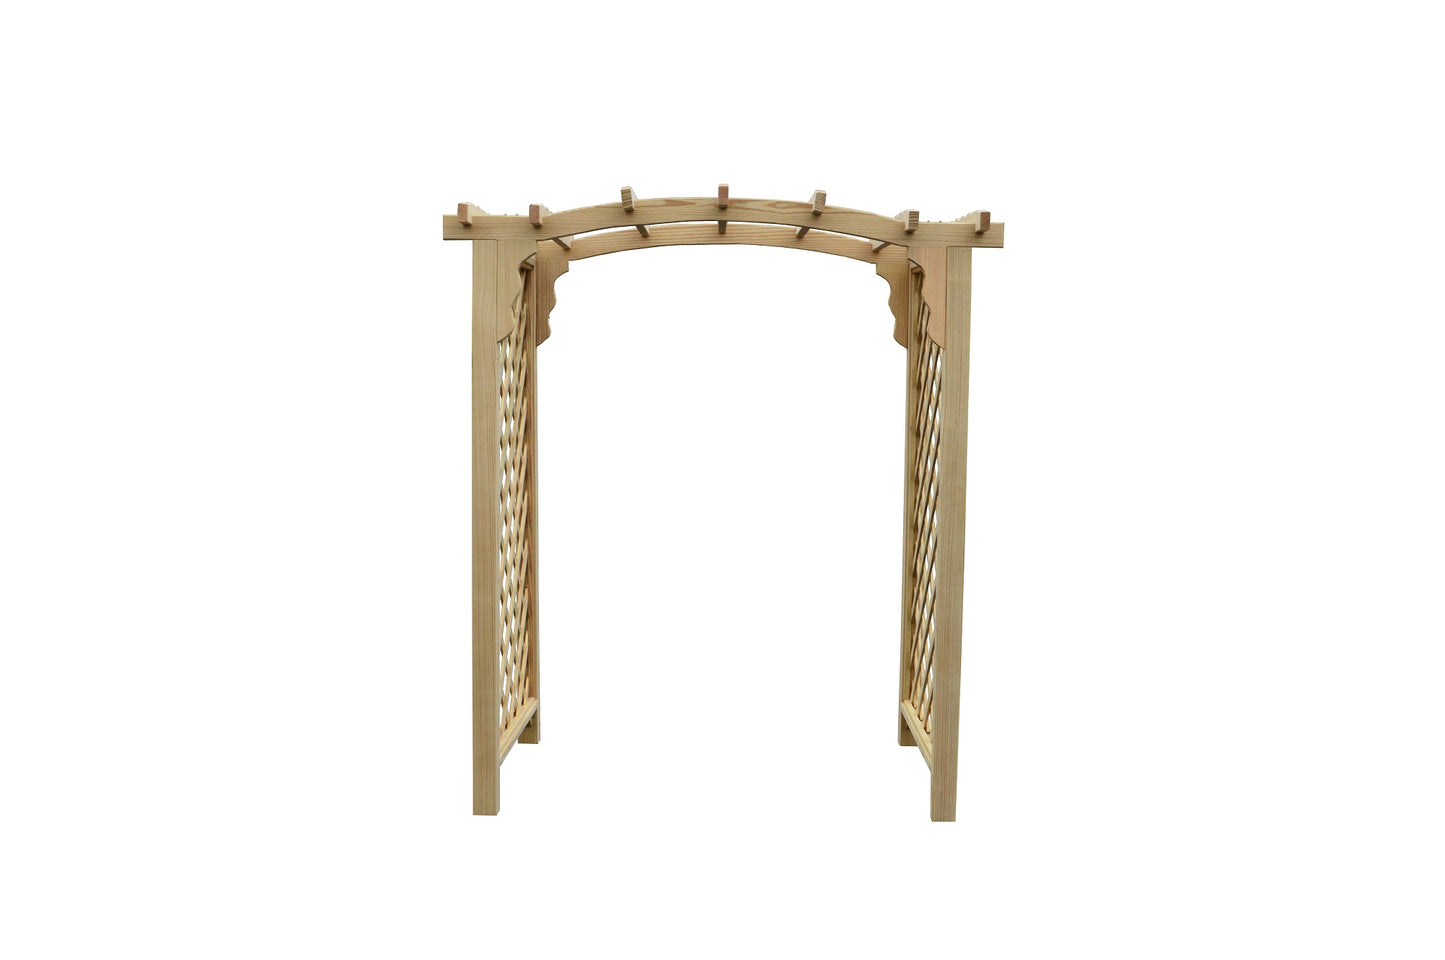 A&L FURNITURE CO. 5' Jamesport Pressure Treated Pine Arbor - LEAD TIME TO SHIP 10 BUSINESS DAYS